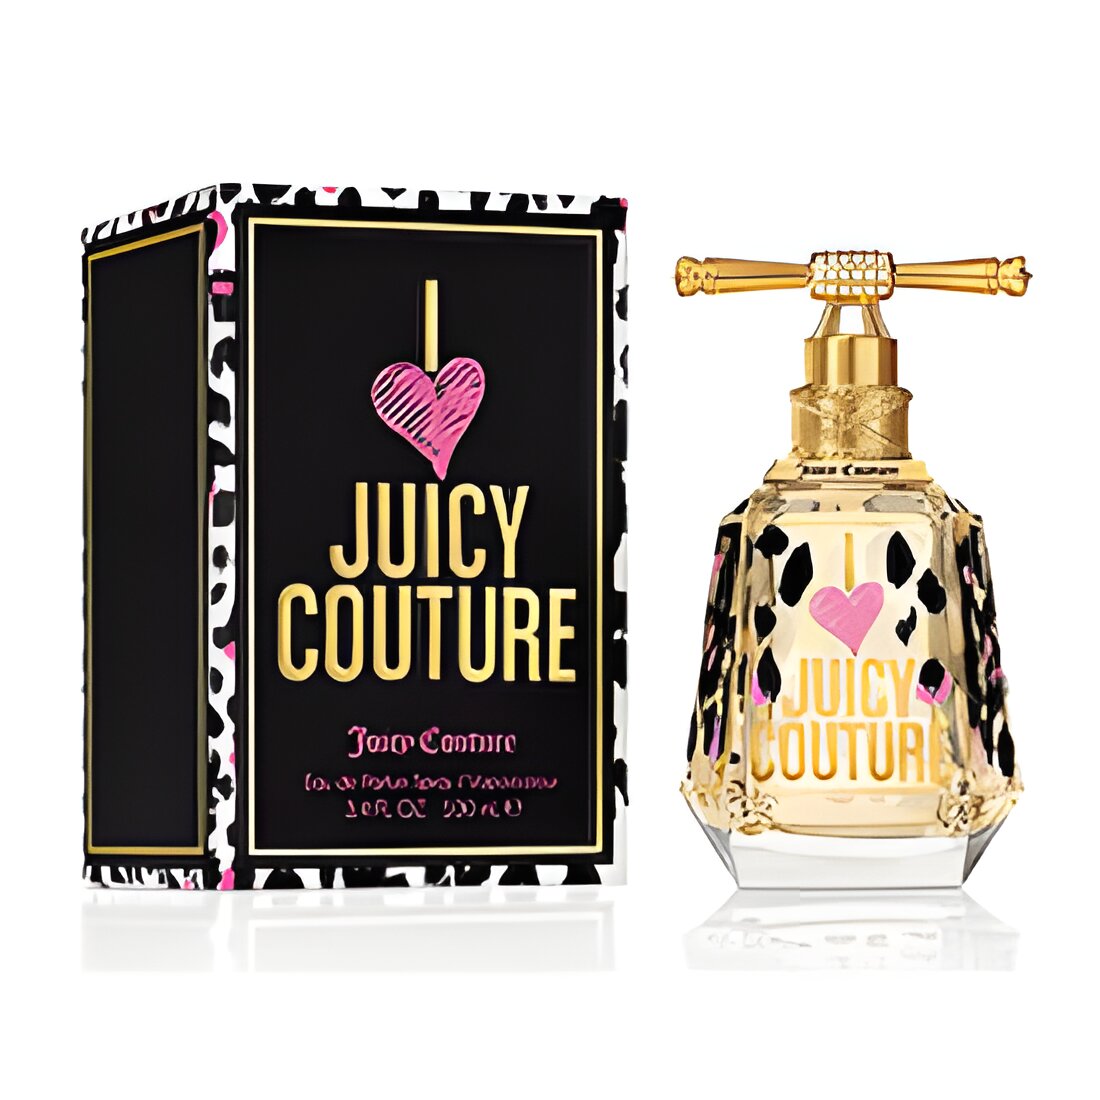 Free Juicy Couture Holiday Fragrances